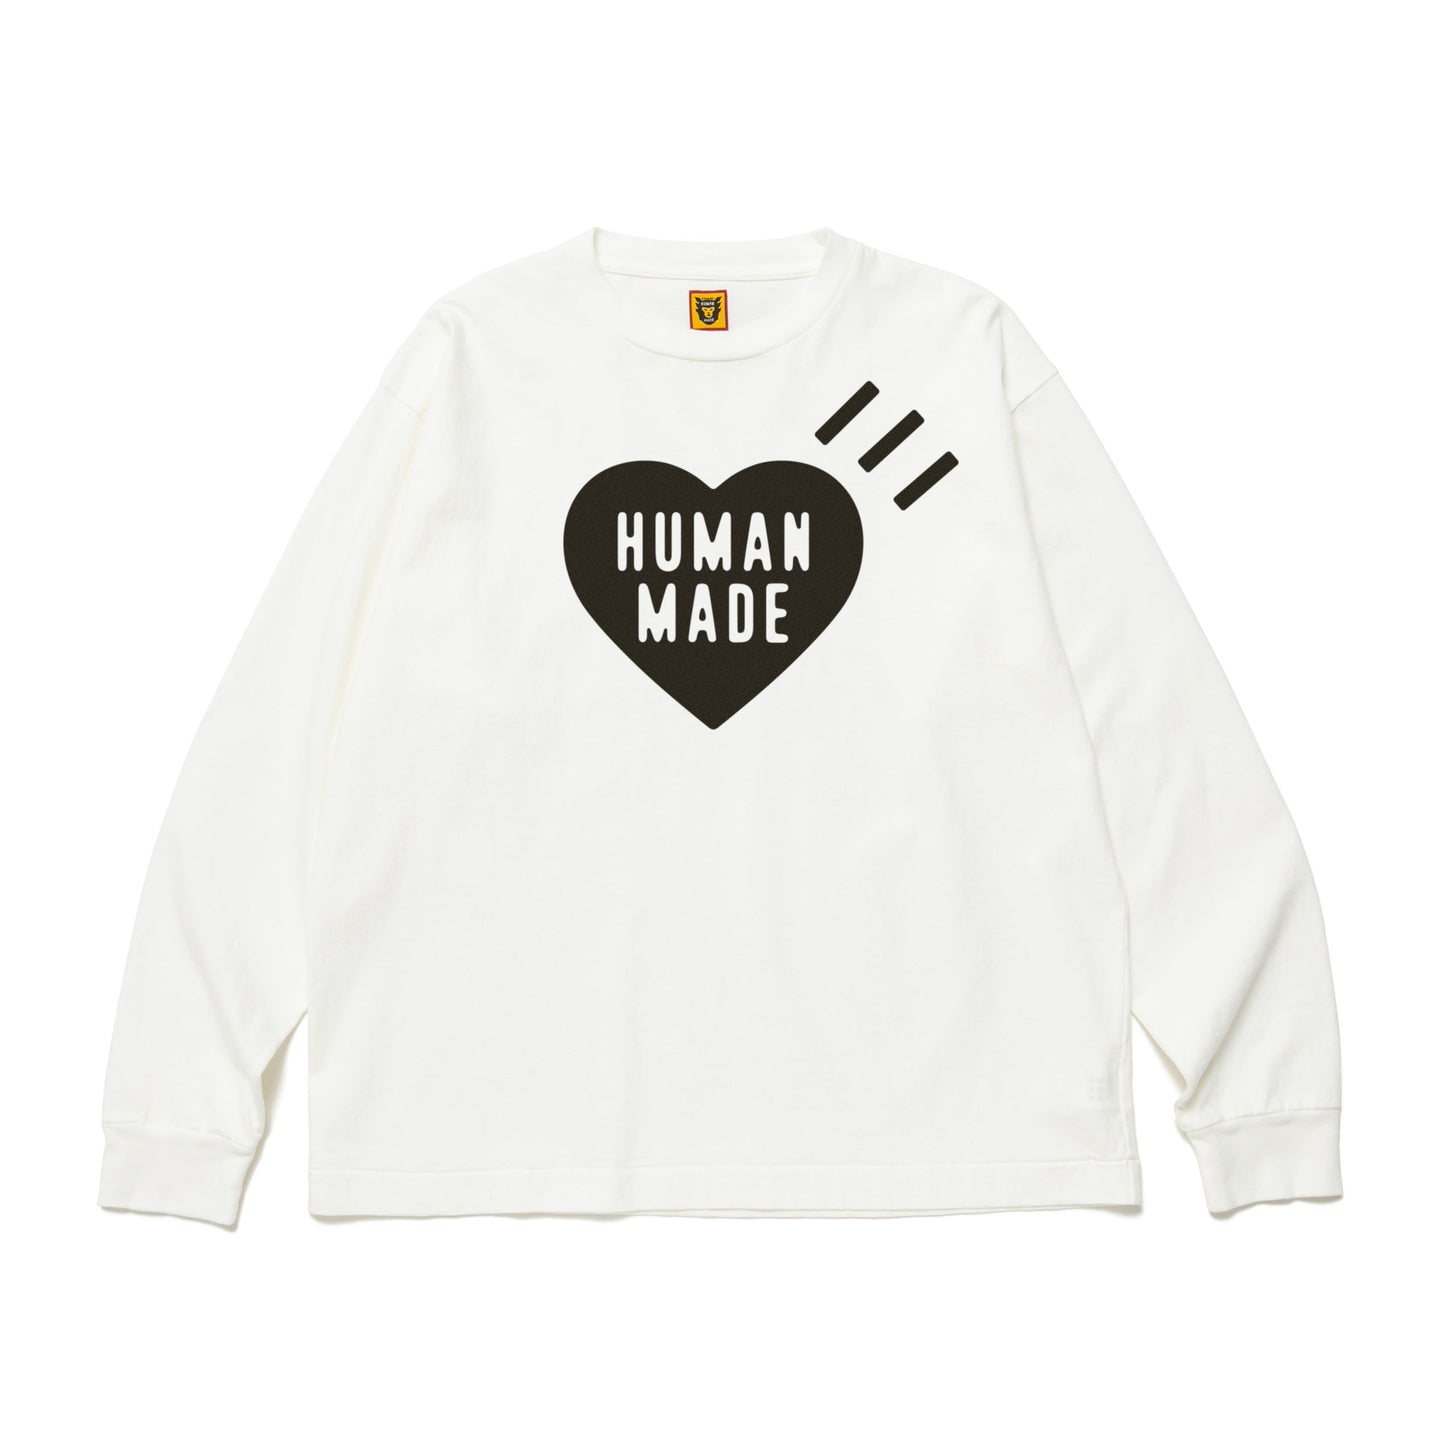 DAILY L/S T-SHIRT #261121 – HUMAN MADE ONLINE STORE